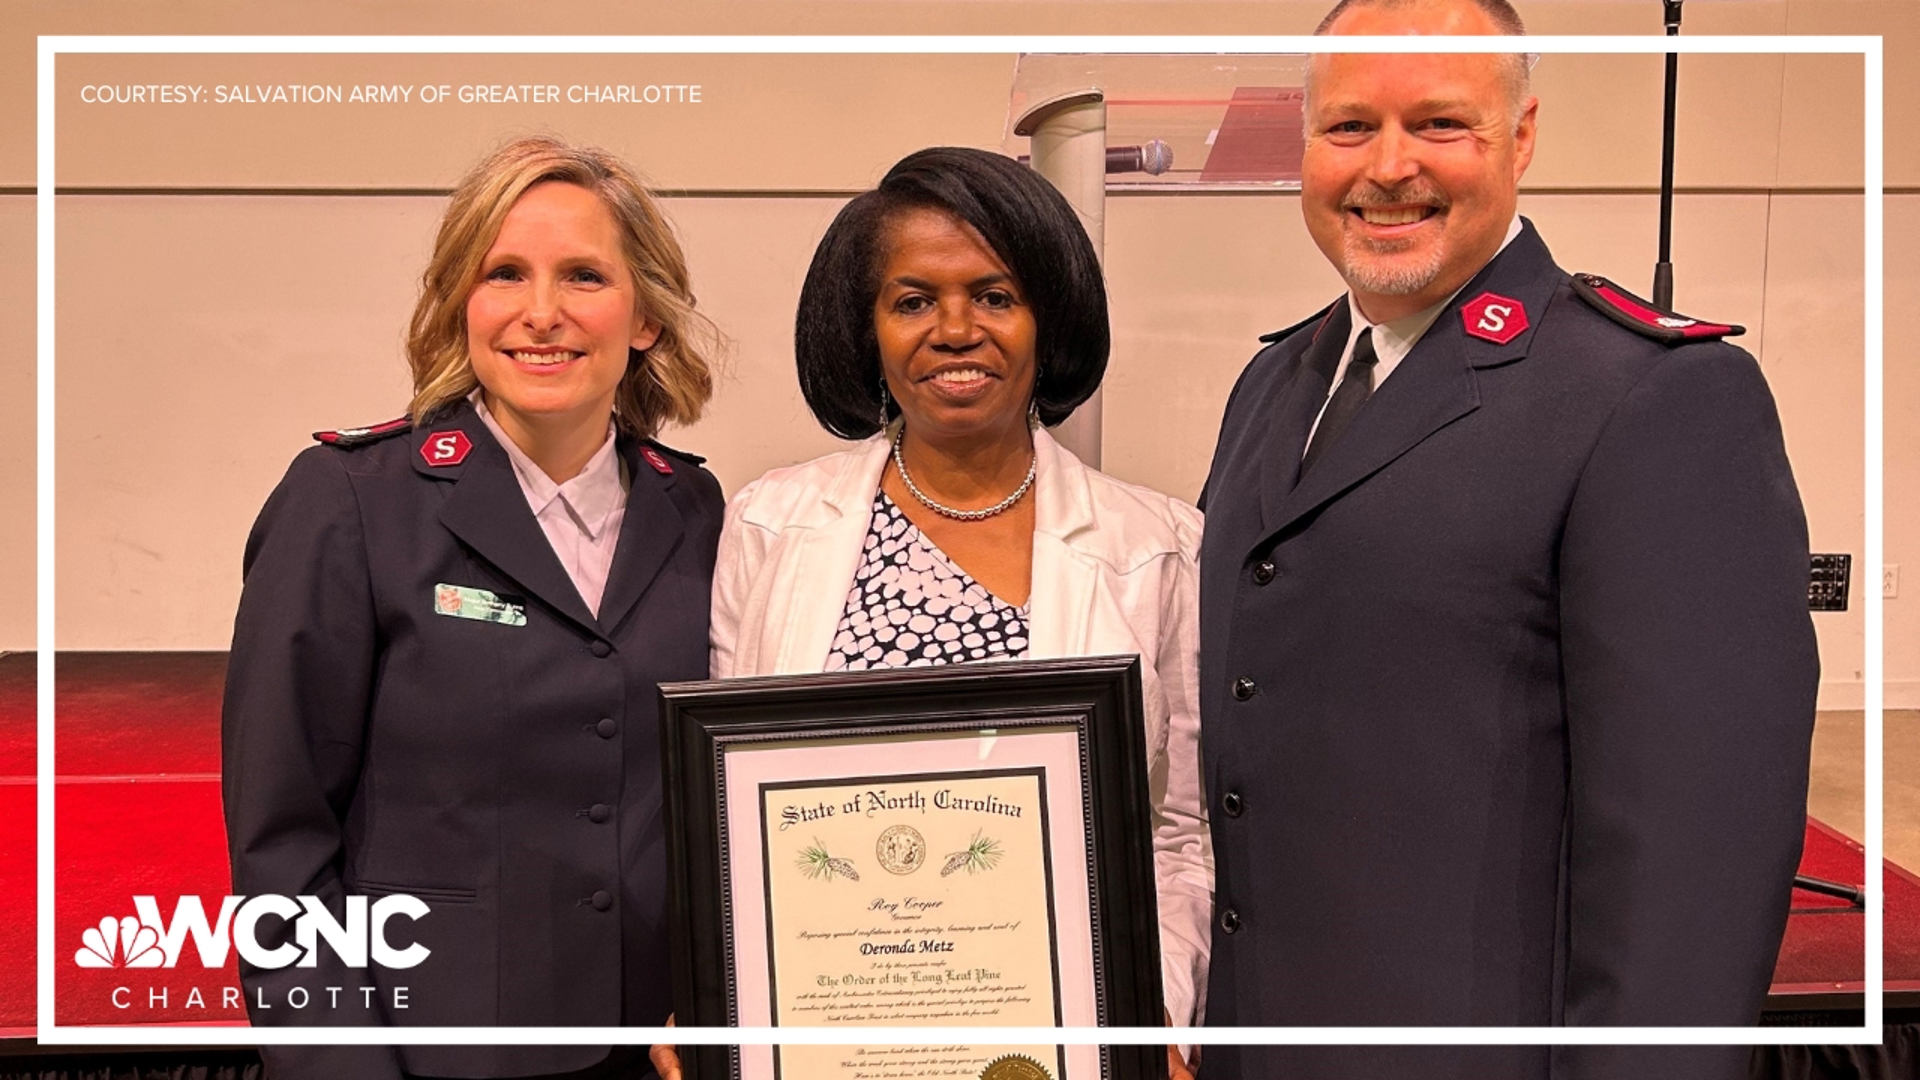 Kayland Hagwood shares how 30 years of serving others has led to Deronda Metz being honored with North Carolina's highest civilian honor.